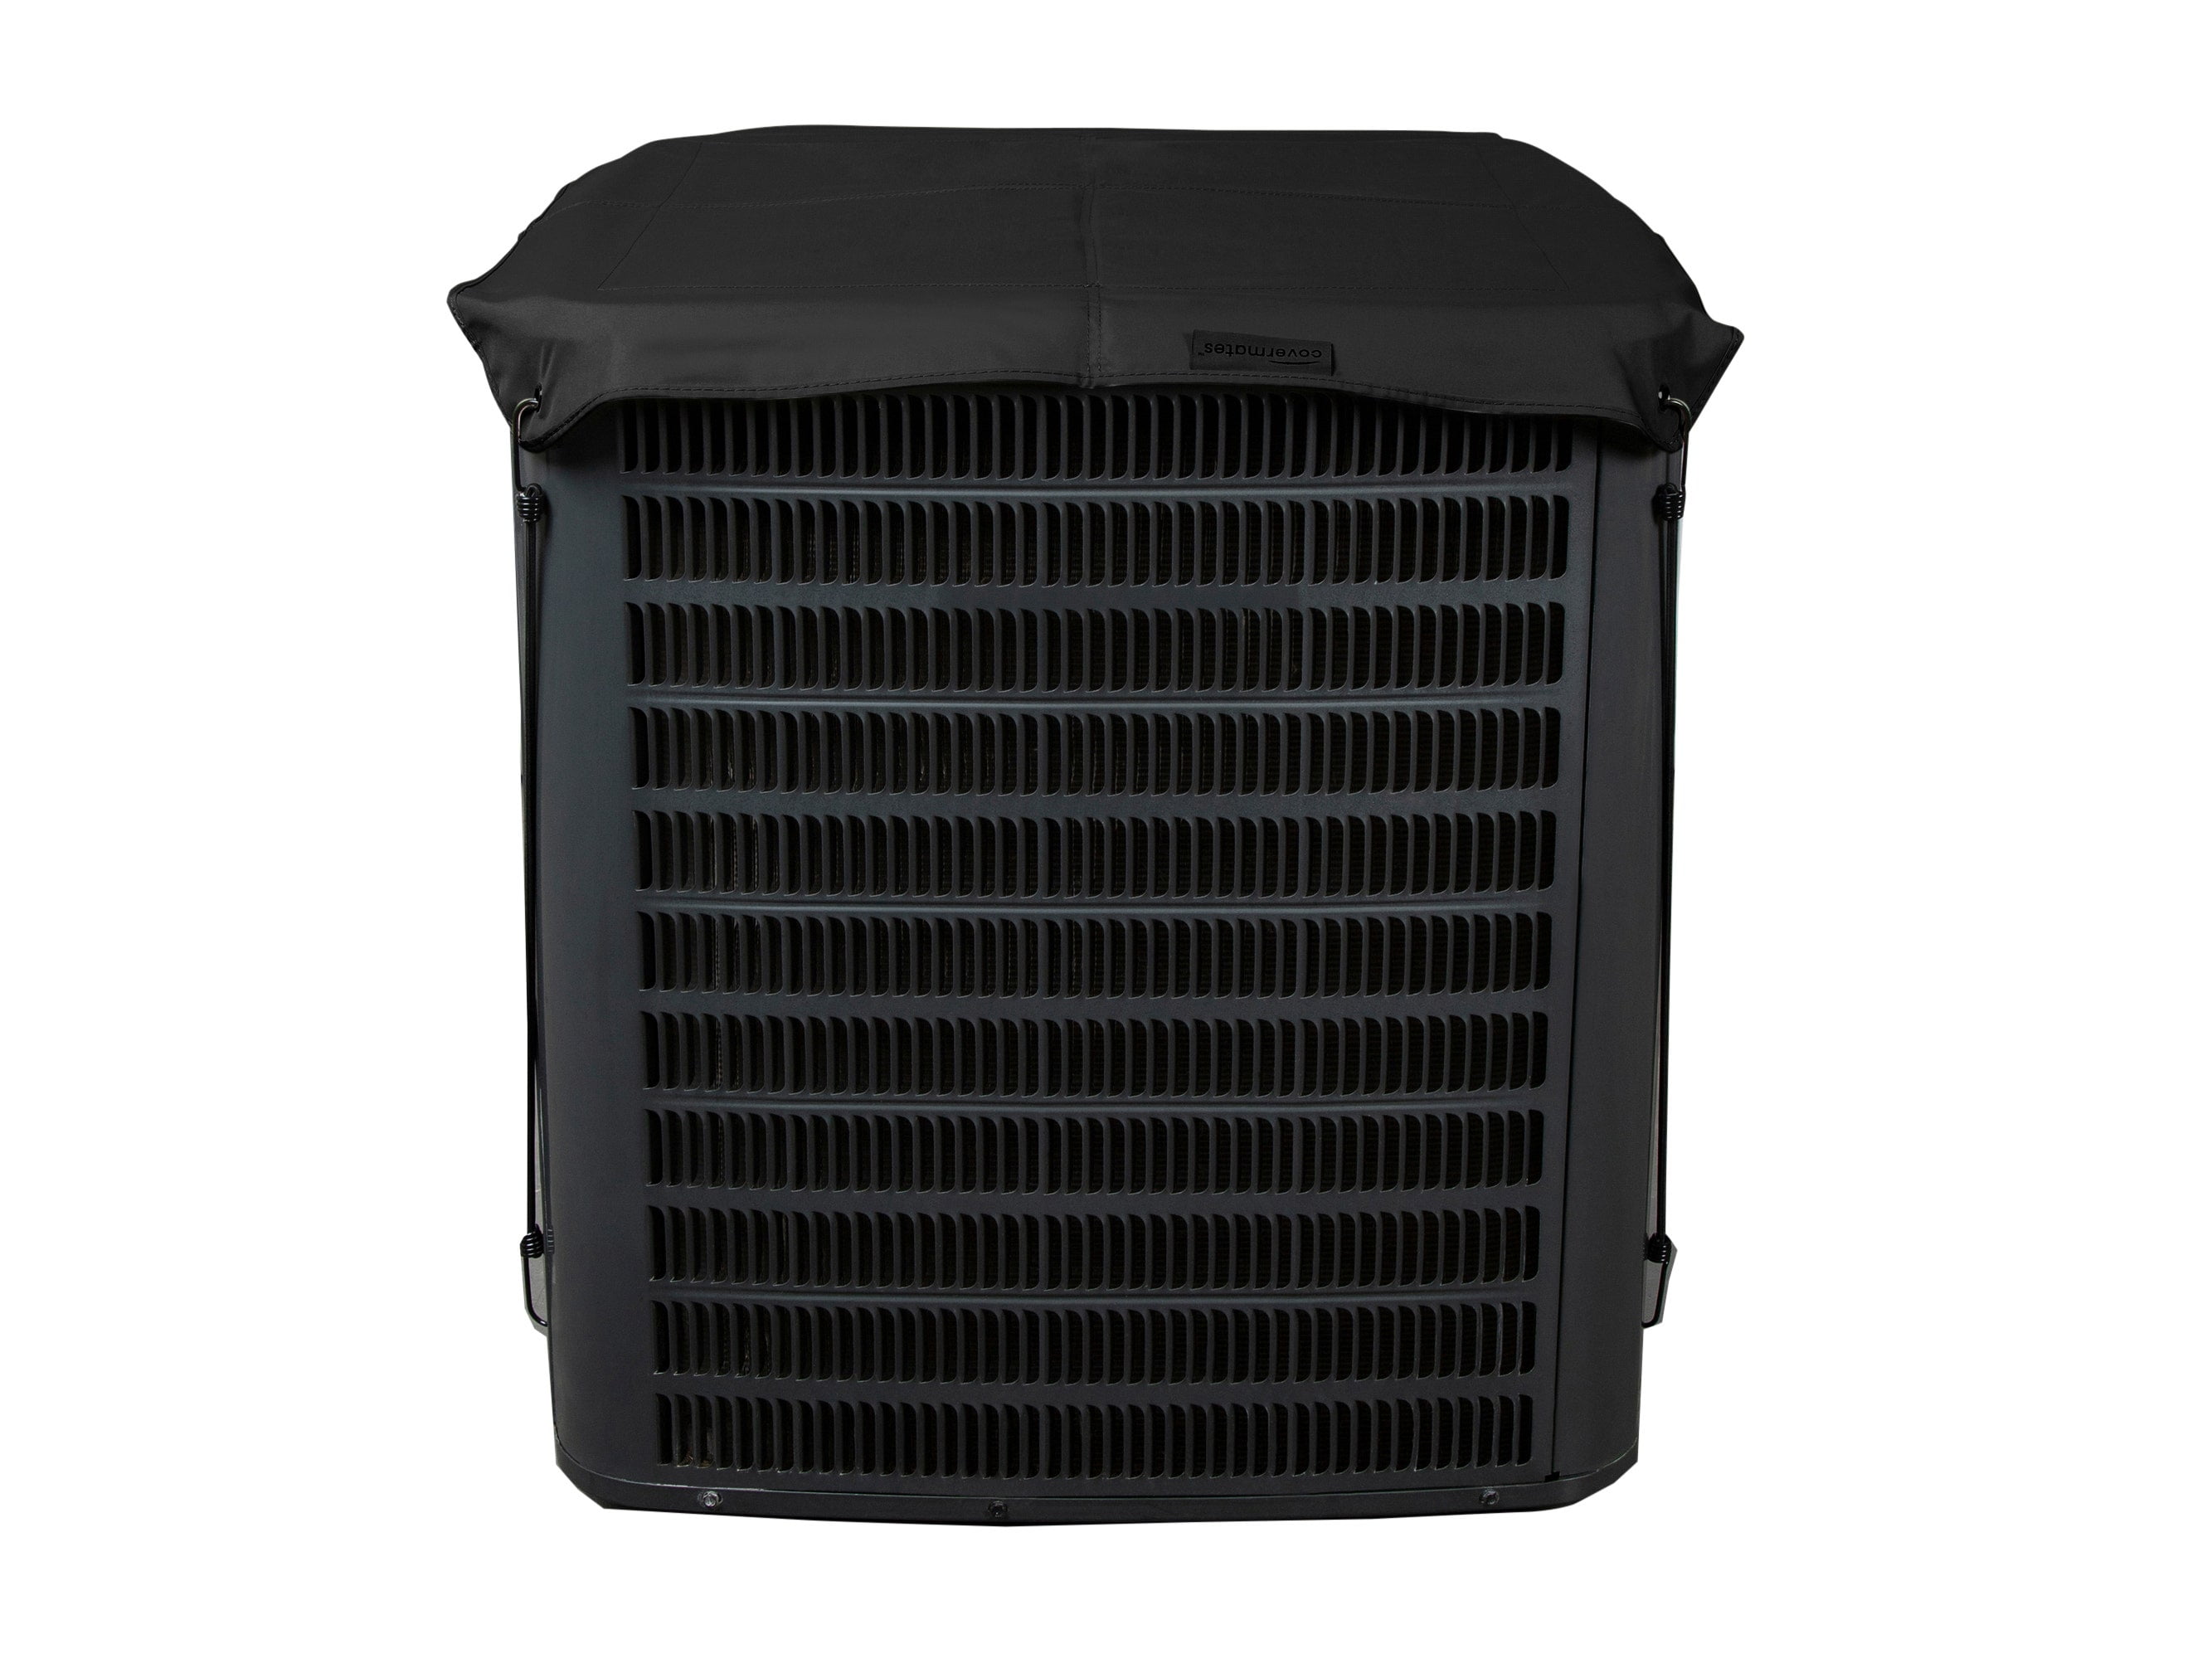 Covermates Armor Top Air Conditioner Cover Light Weight Material AC & Equipment-Charcoal Breathable Mesh Weather Resistant